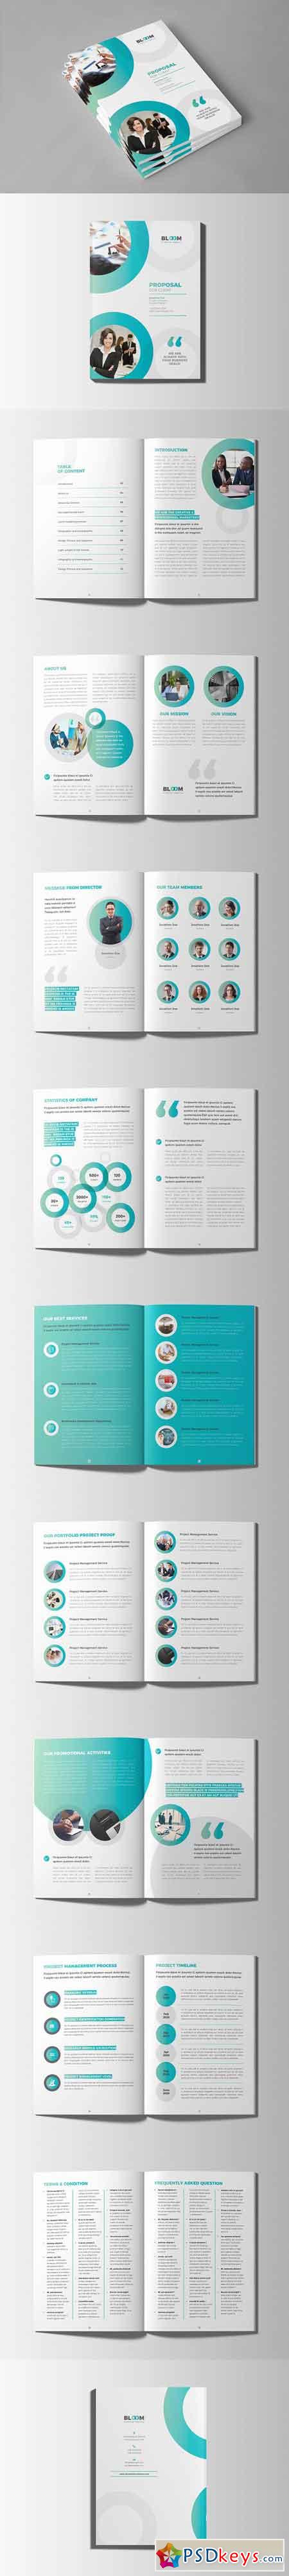 Business Project Proposal Design 3195682